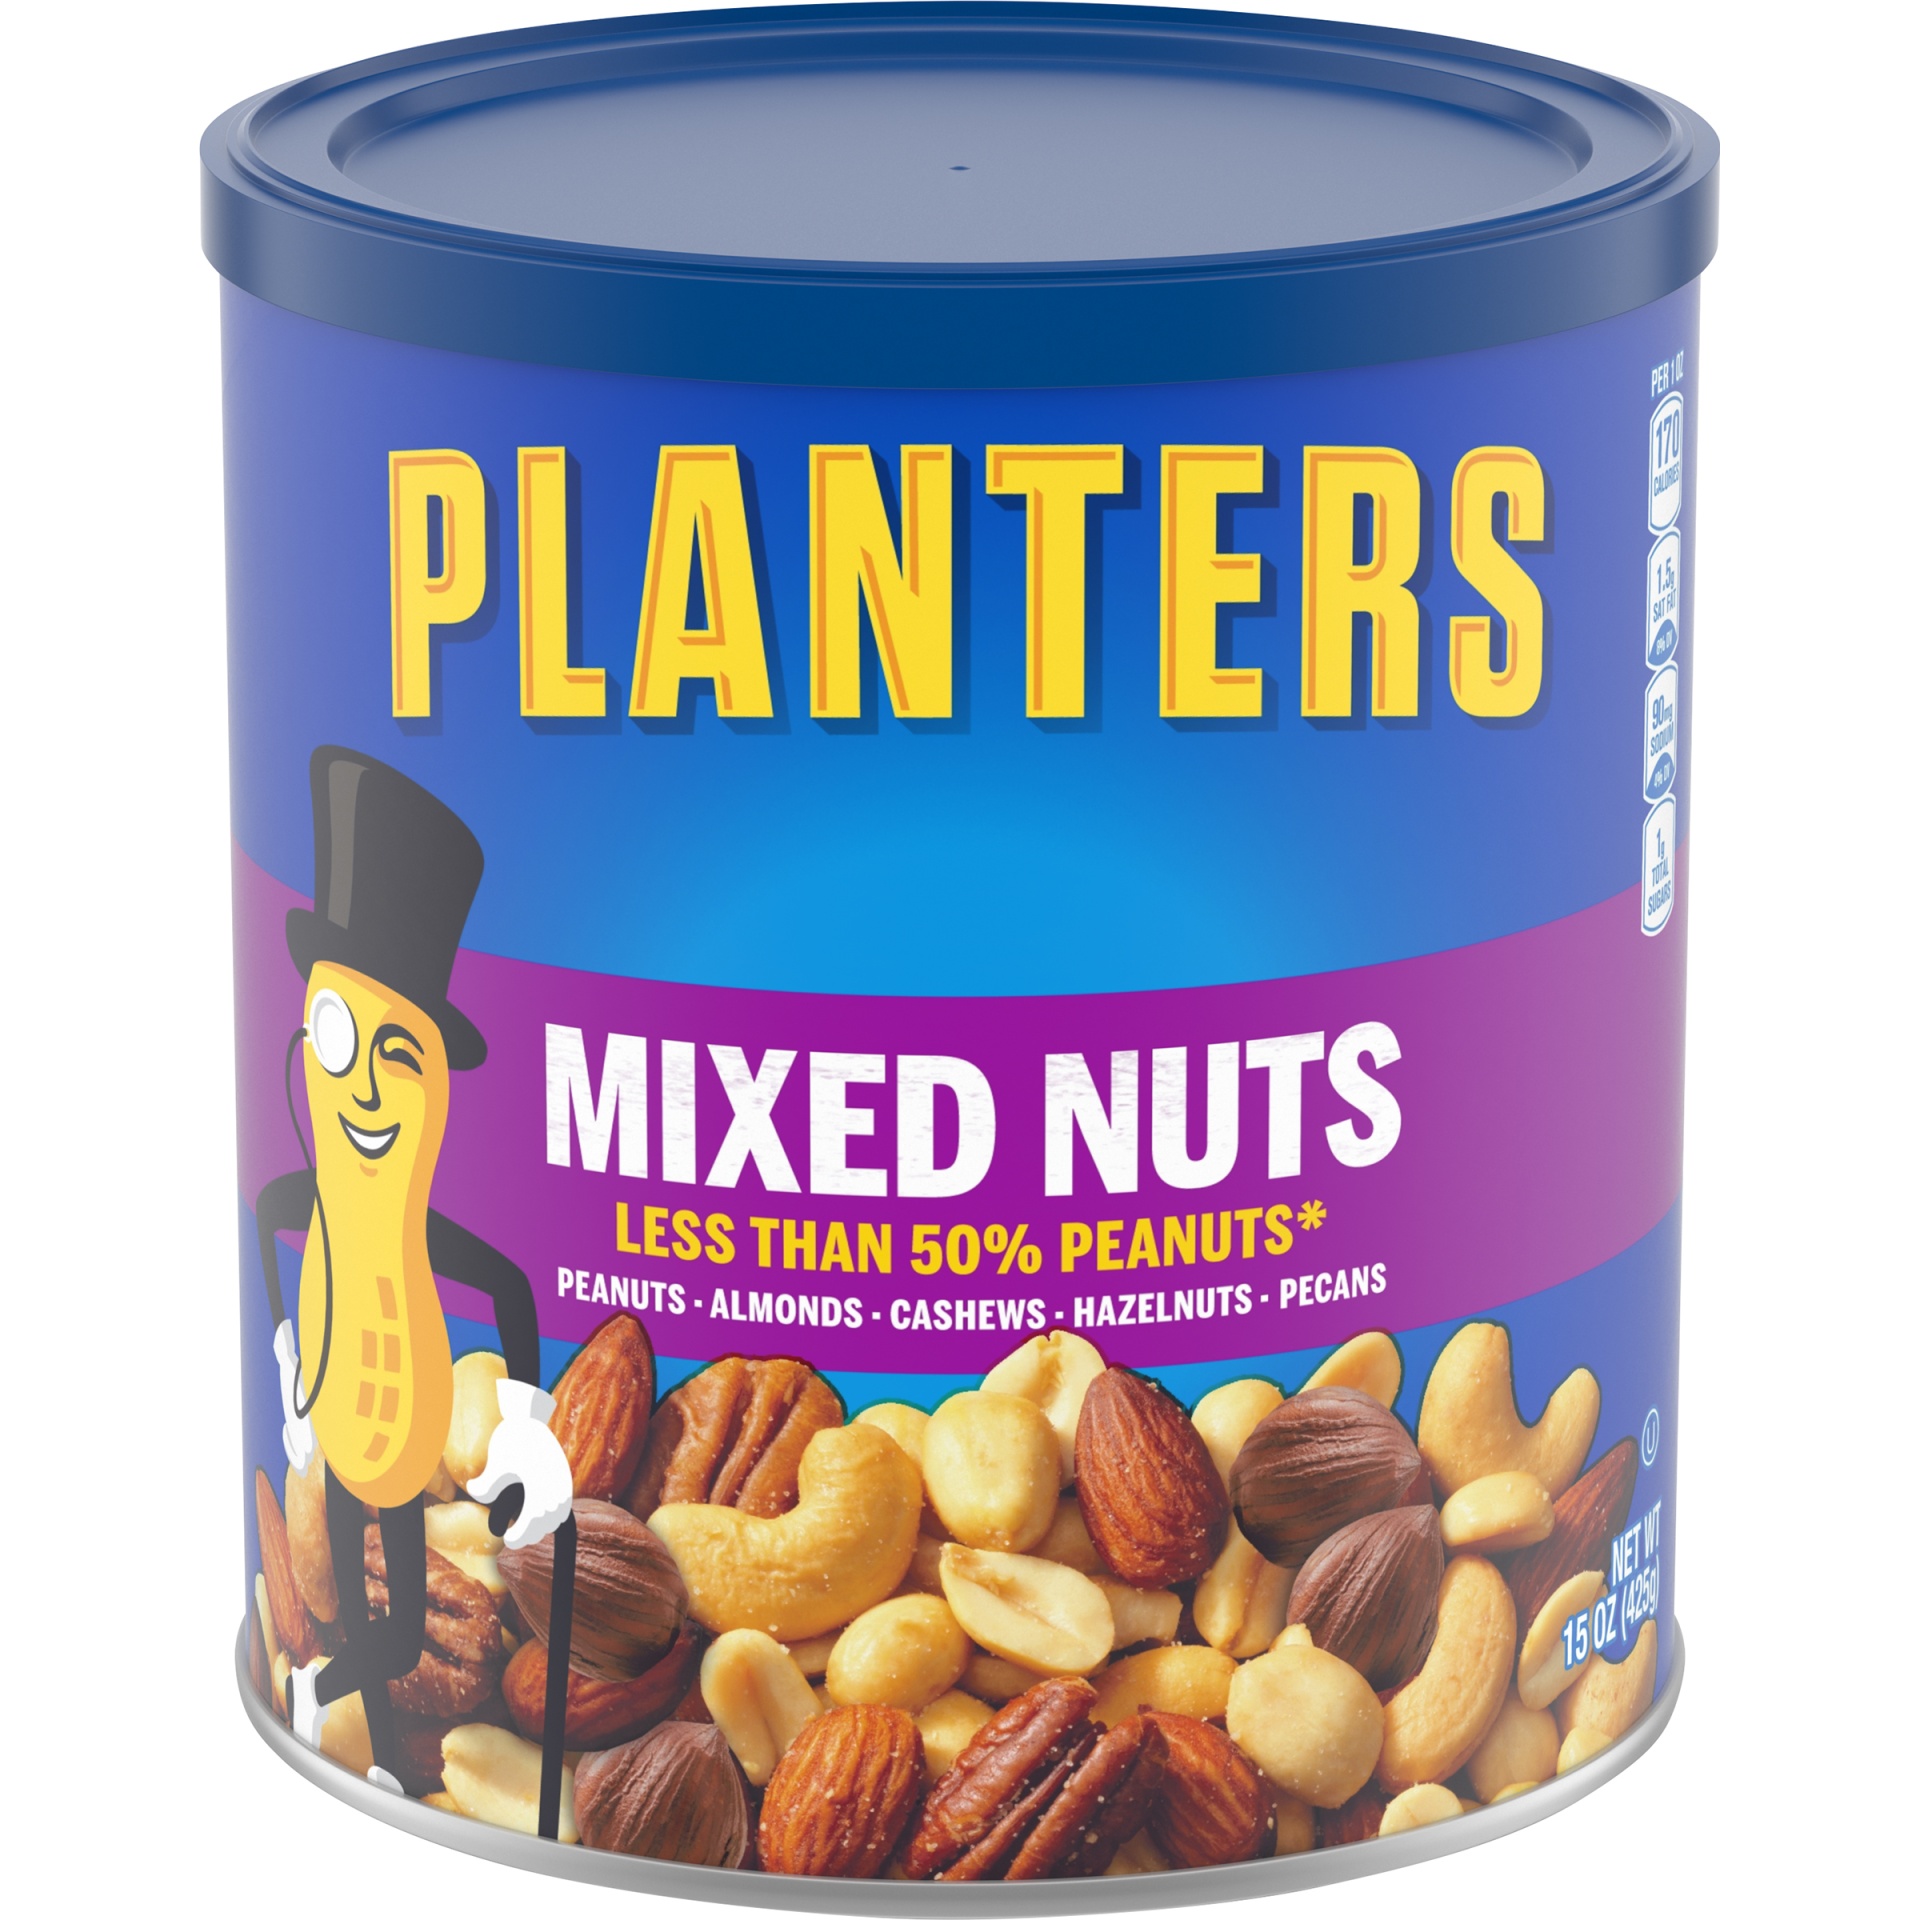 slide 1 of 14, Planters Mixed Nuts Less Than 50% Peanuts with Peanuts, Almonds, Cashews, Hazelnuts & Pecans, 15 oz